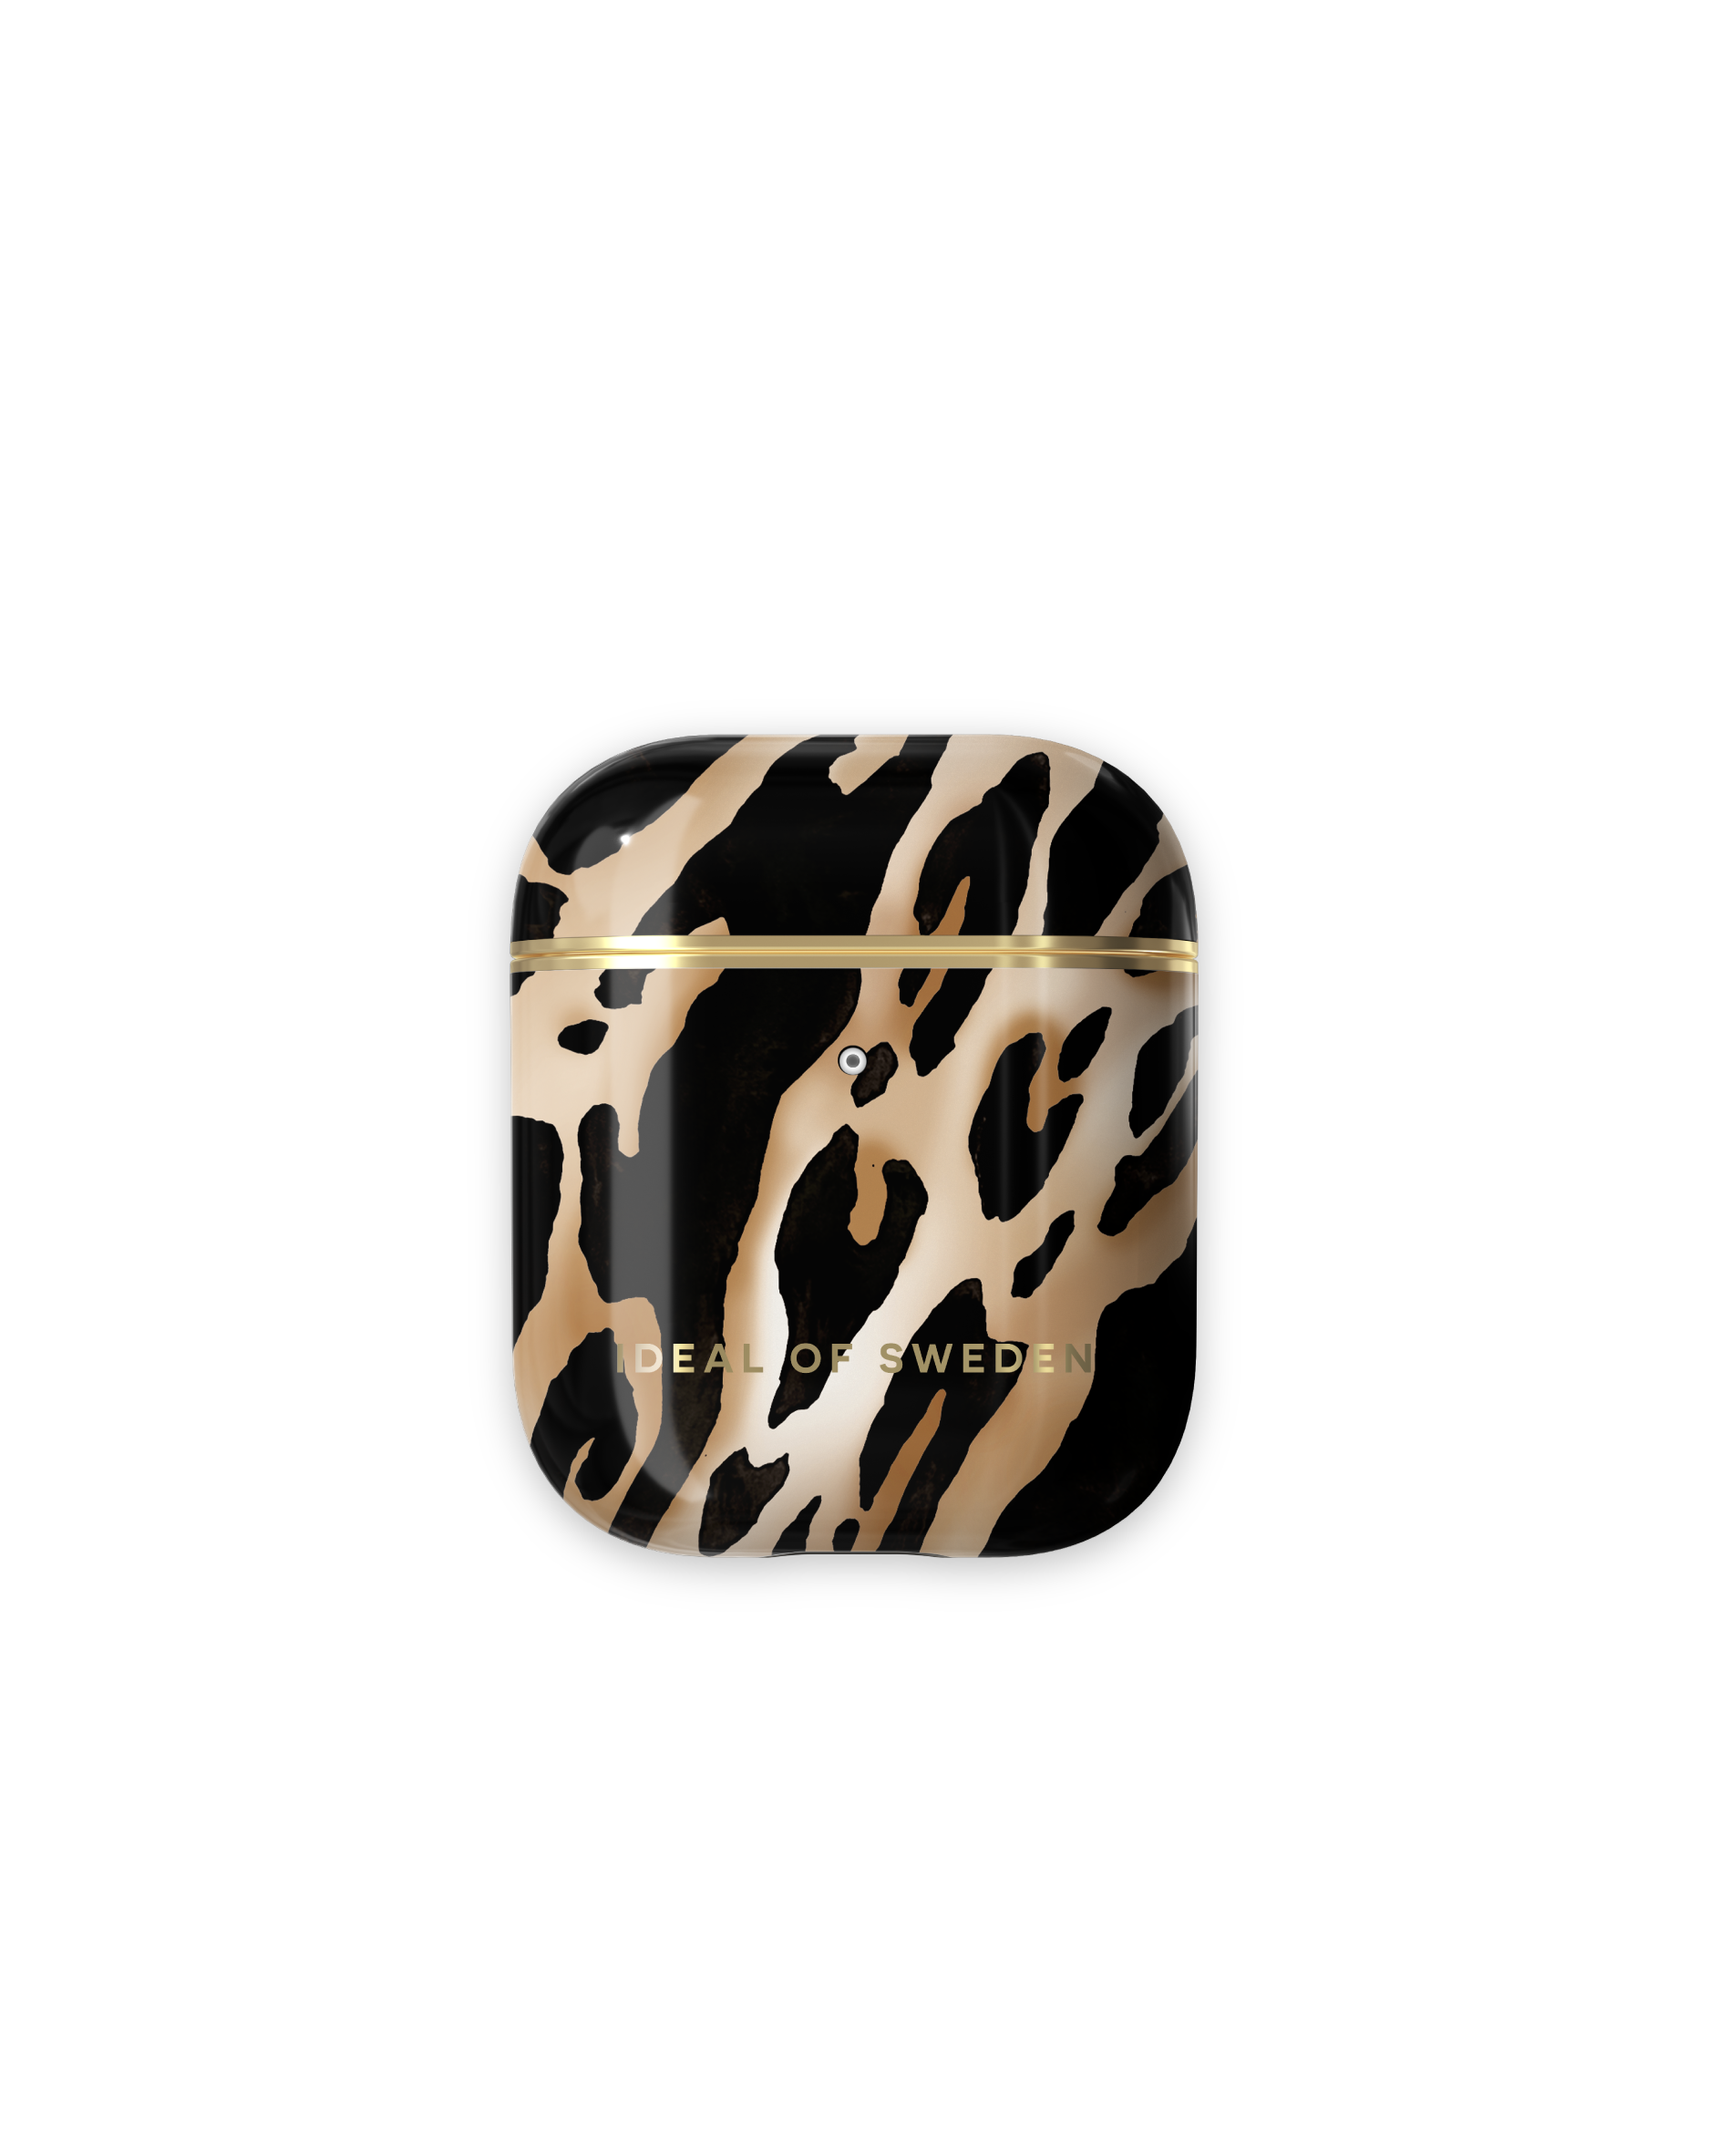 OF IDEAL IDFAPCAW21-356 AirPod Cover Leopard Iconic Apple Case für: Full passend SWEDEN